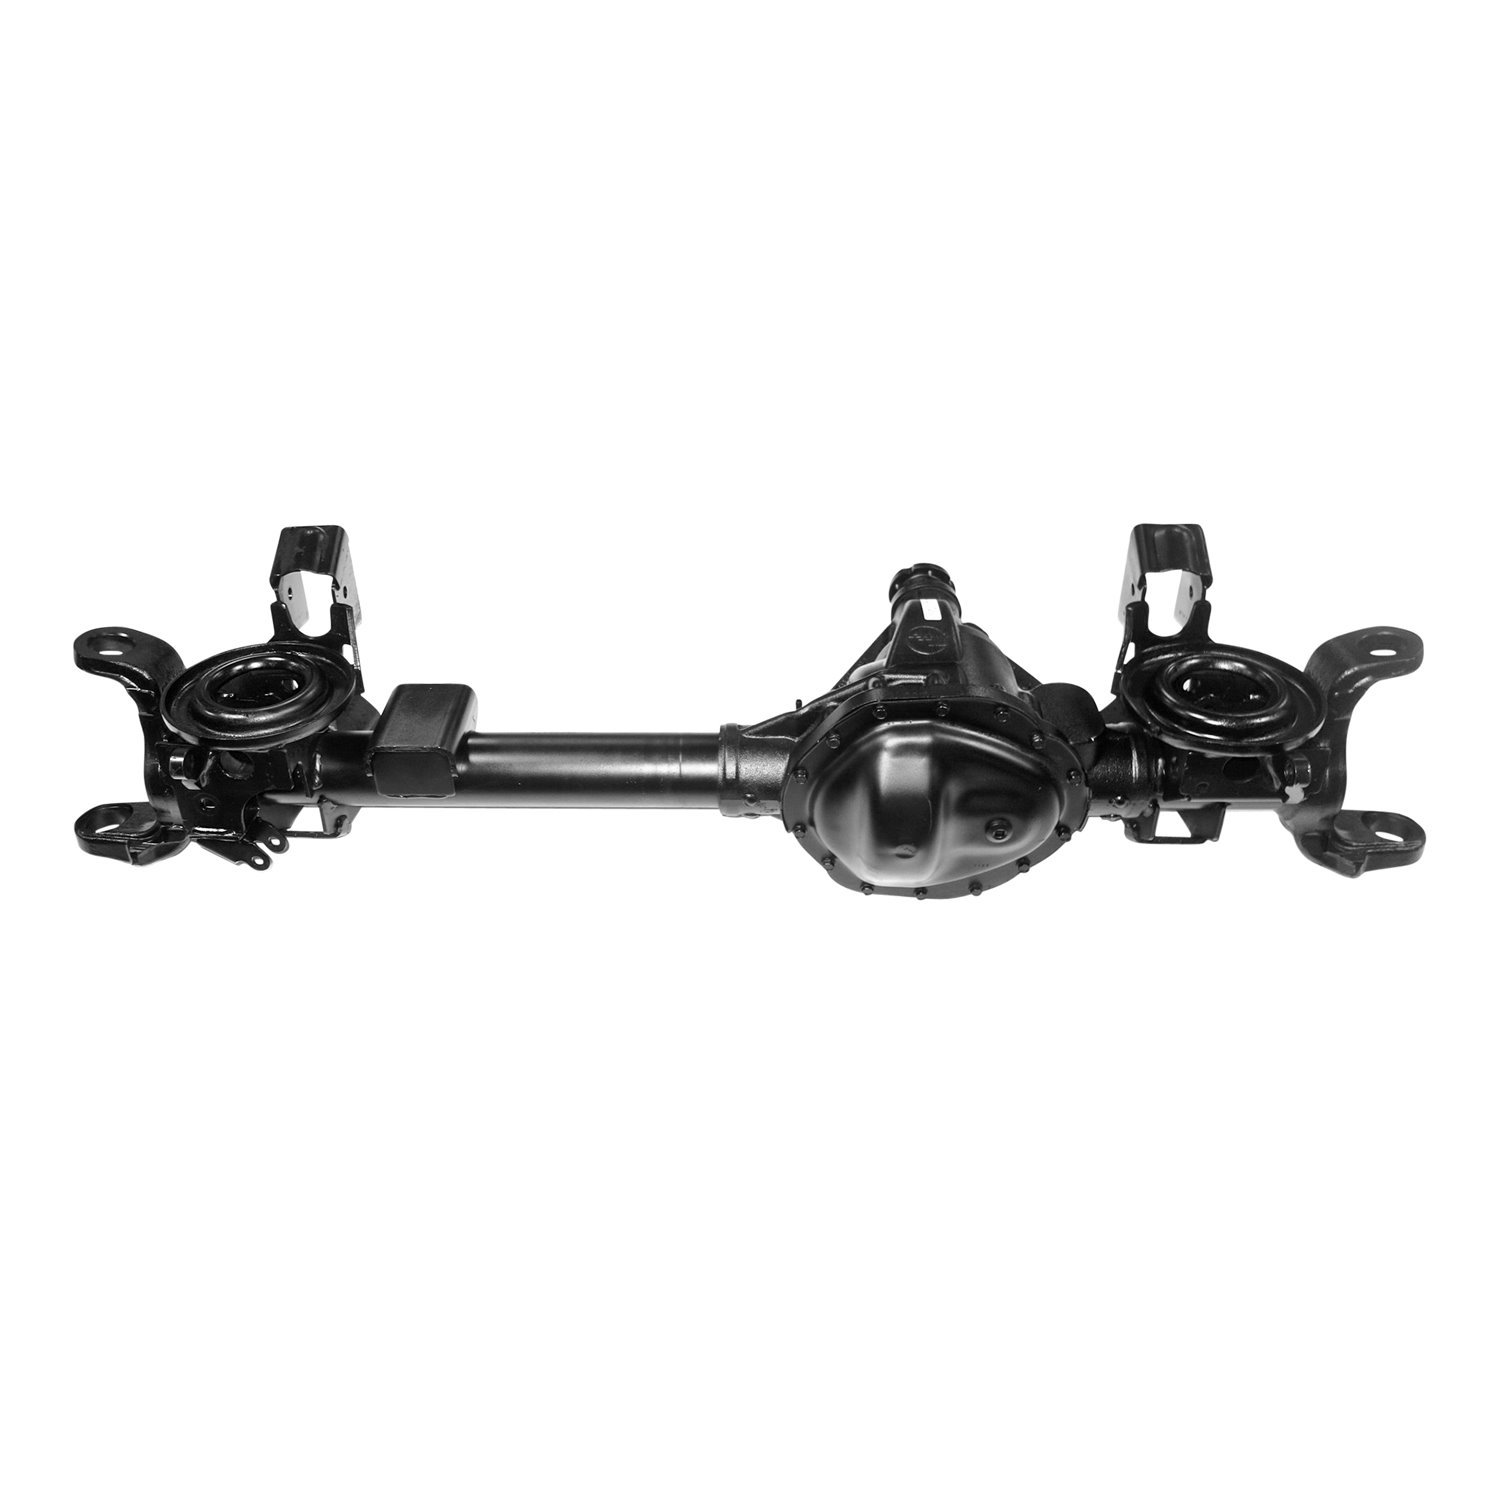 Remanufactured Front Axle Assembly 9.25" 2013 Ram 2500 & 3500 3.42 ,